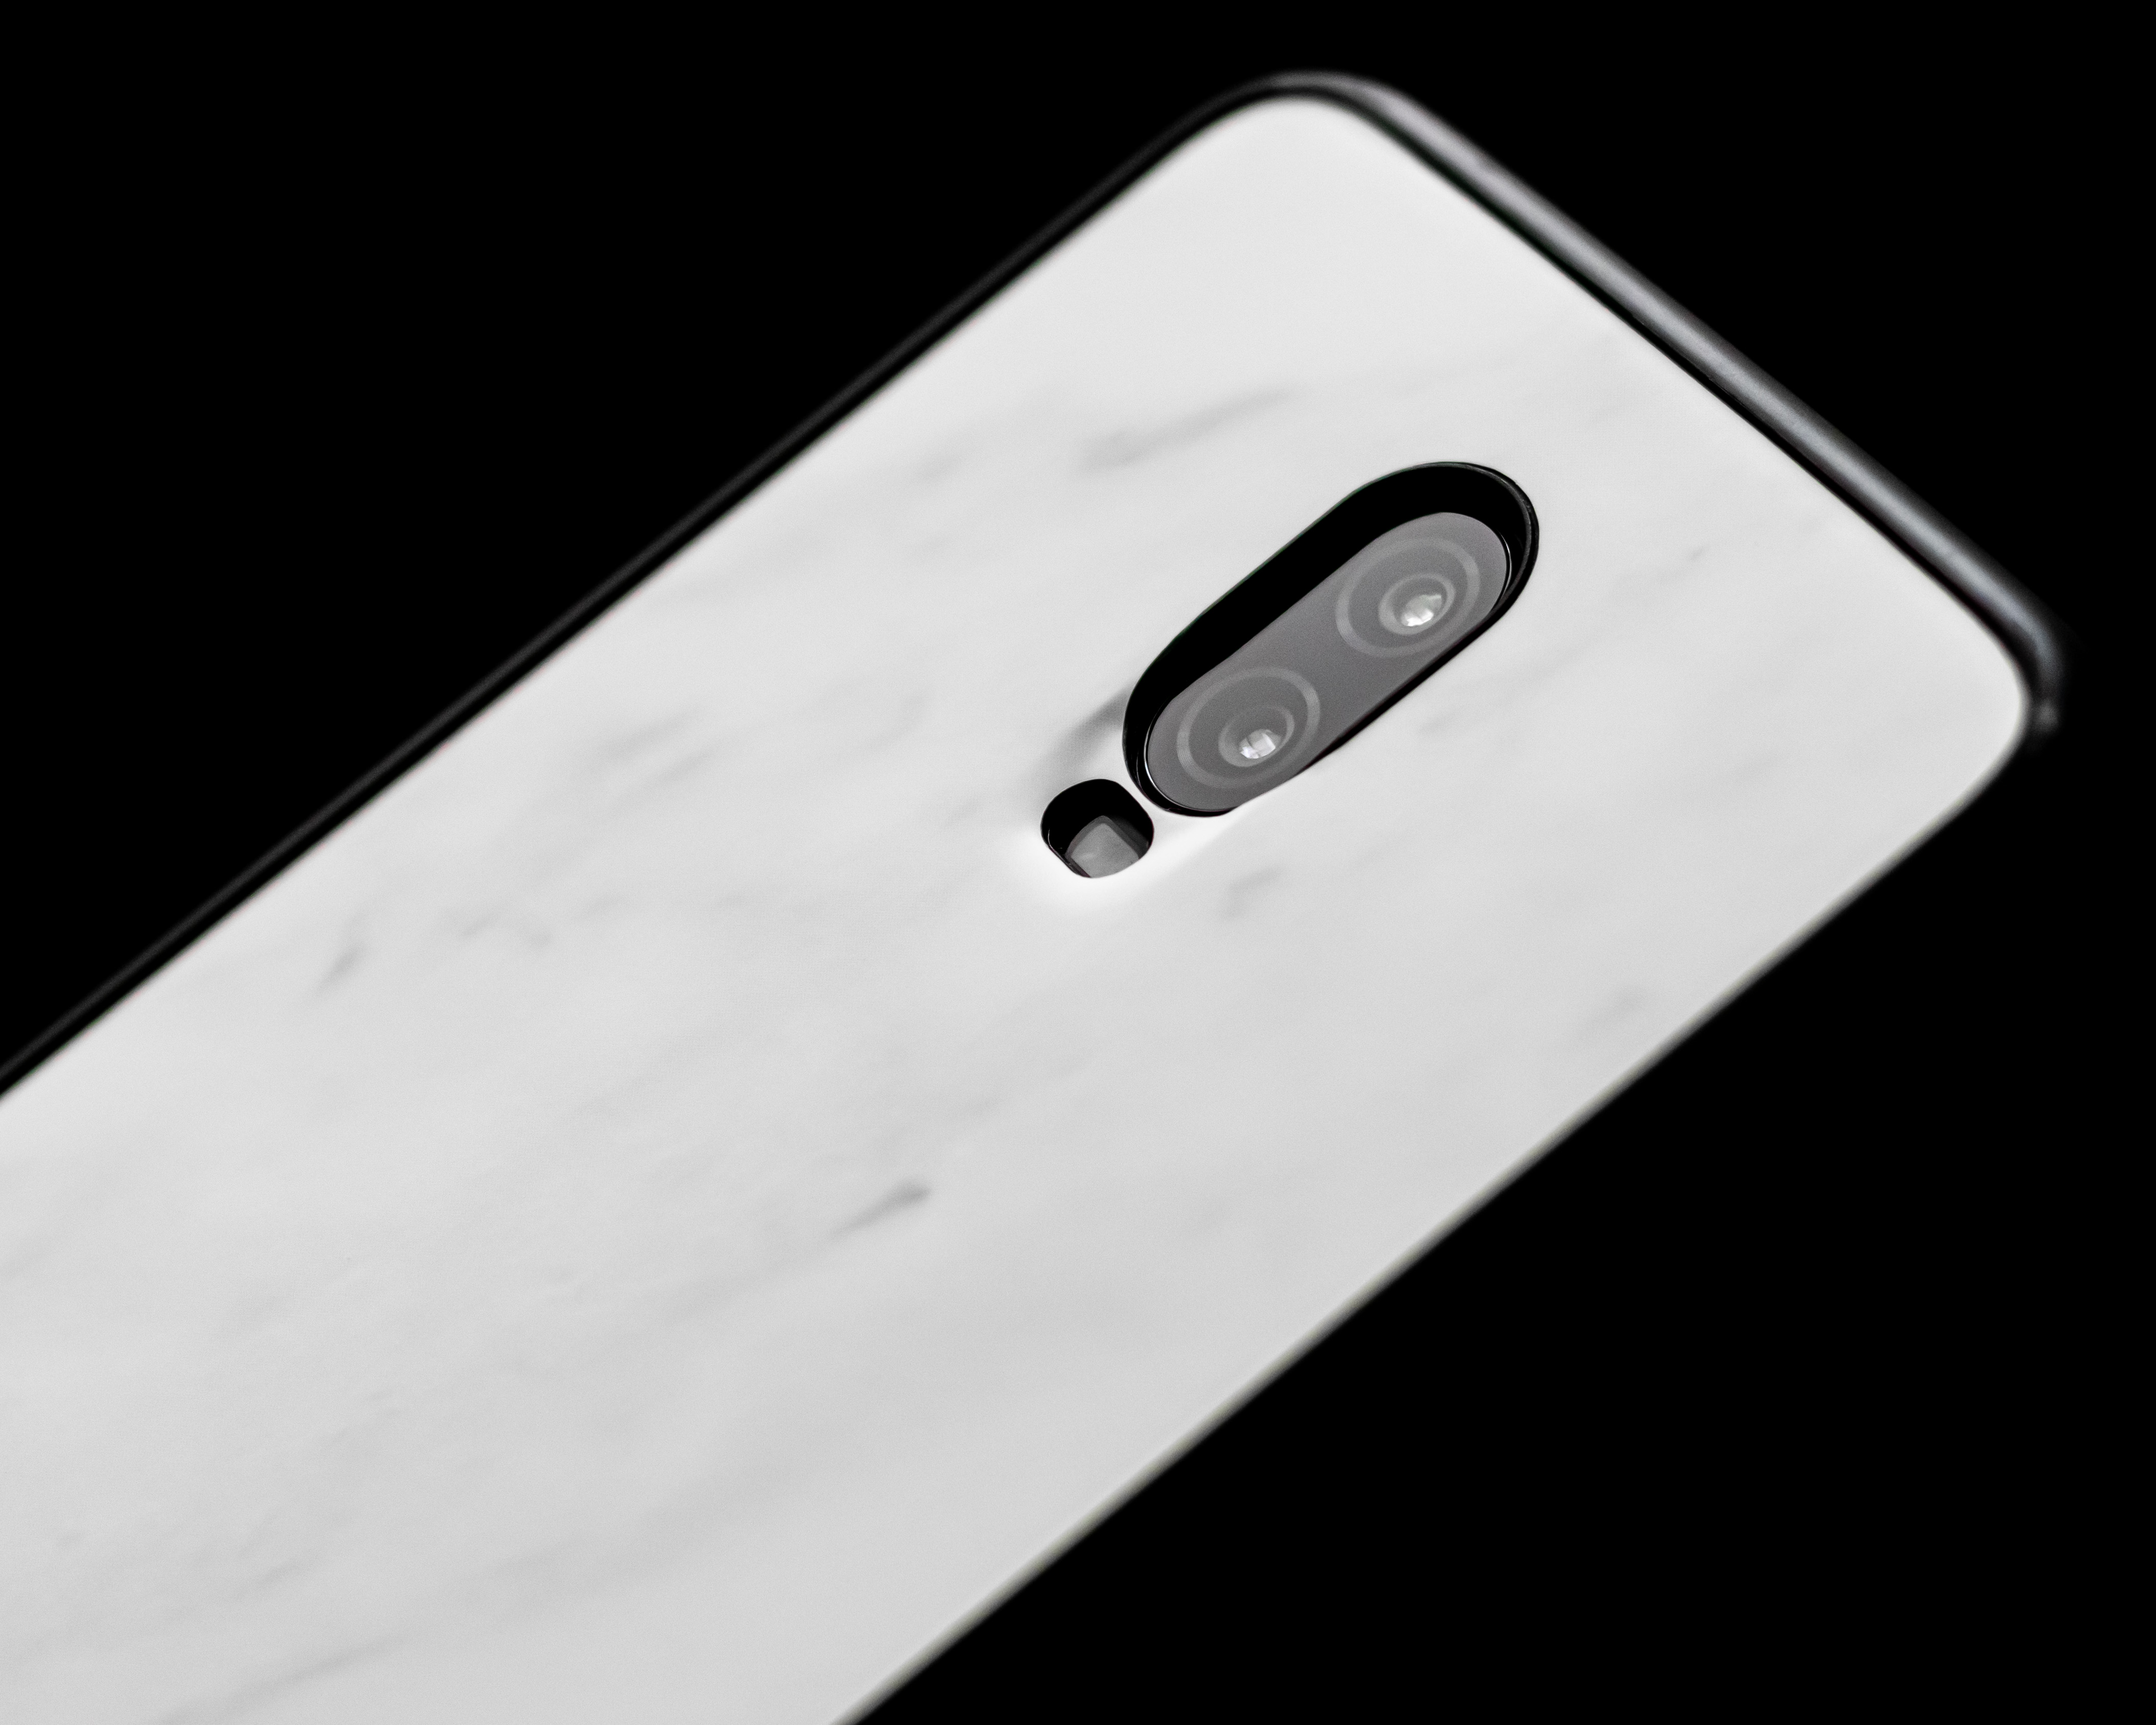 OnePlus released Android Q Developer Preview 2 update for OnePlus 6/6T